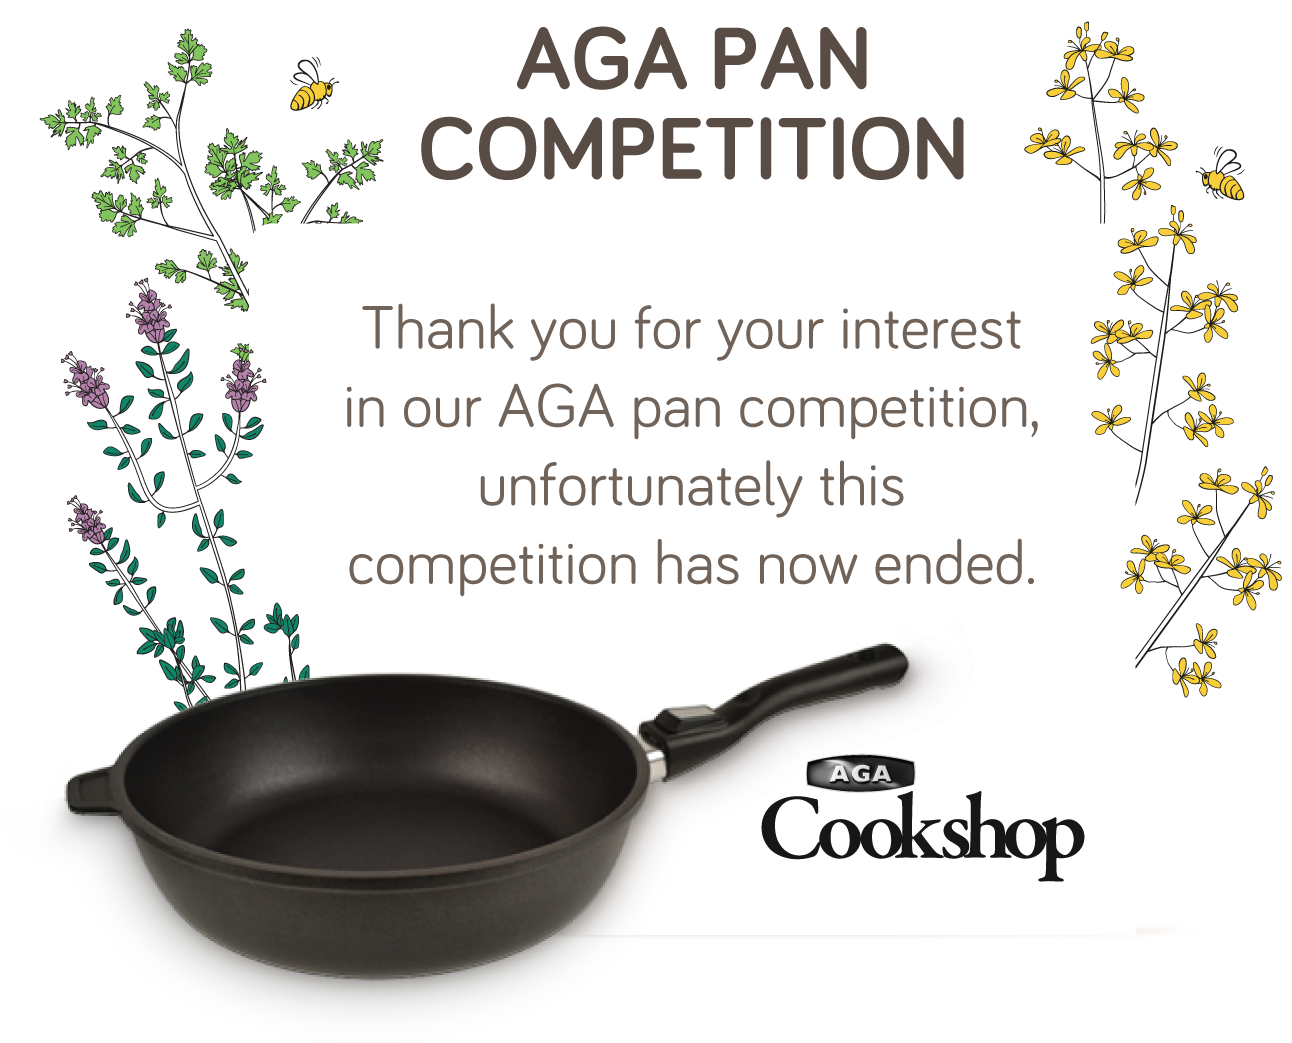 Thank you for your interest in our AGA pan competition, unfortunately this competition has now ended.